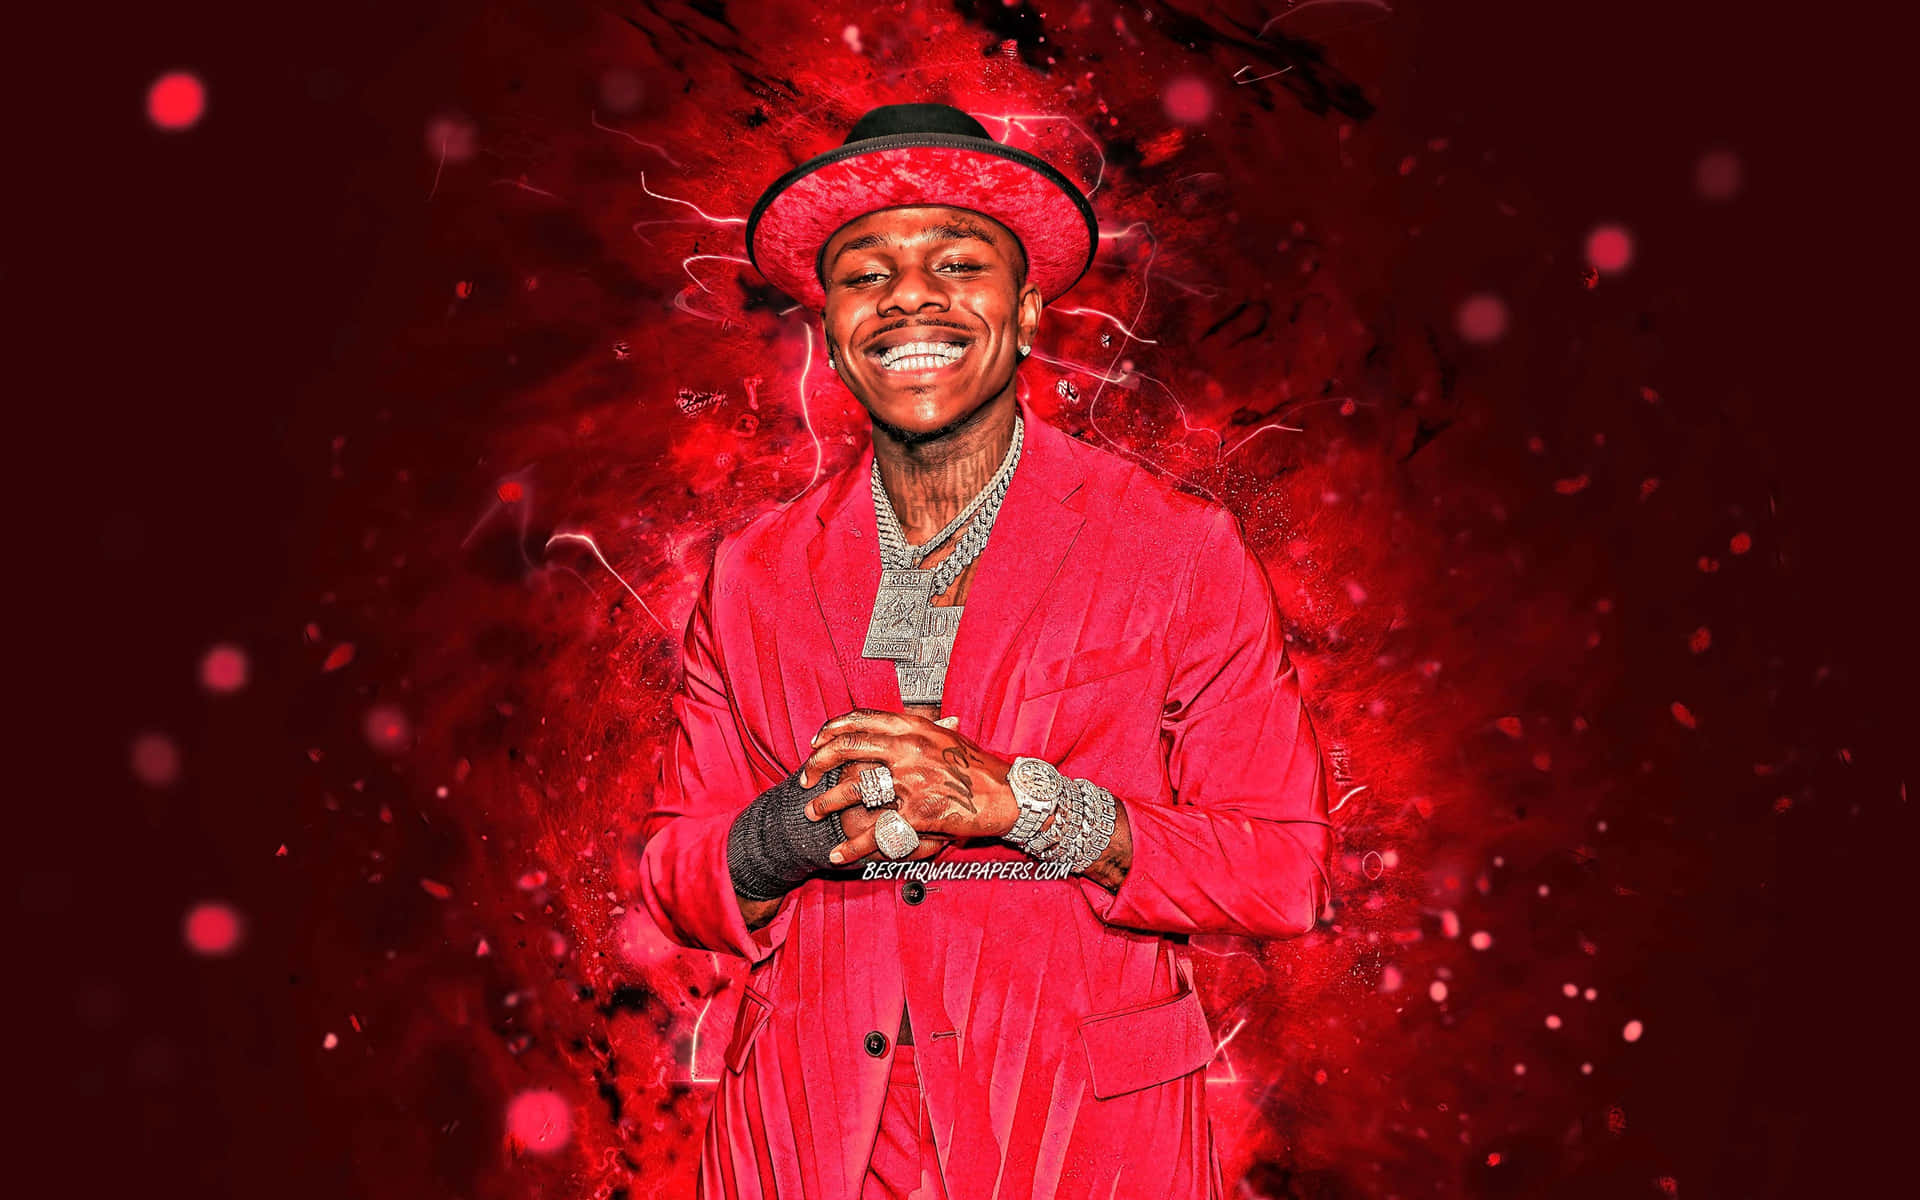 DaBaby in action on stage with energetic performance